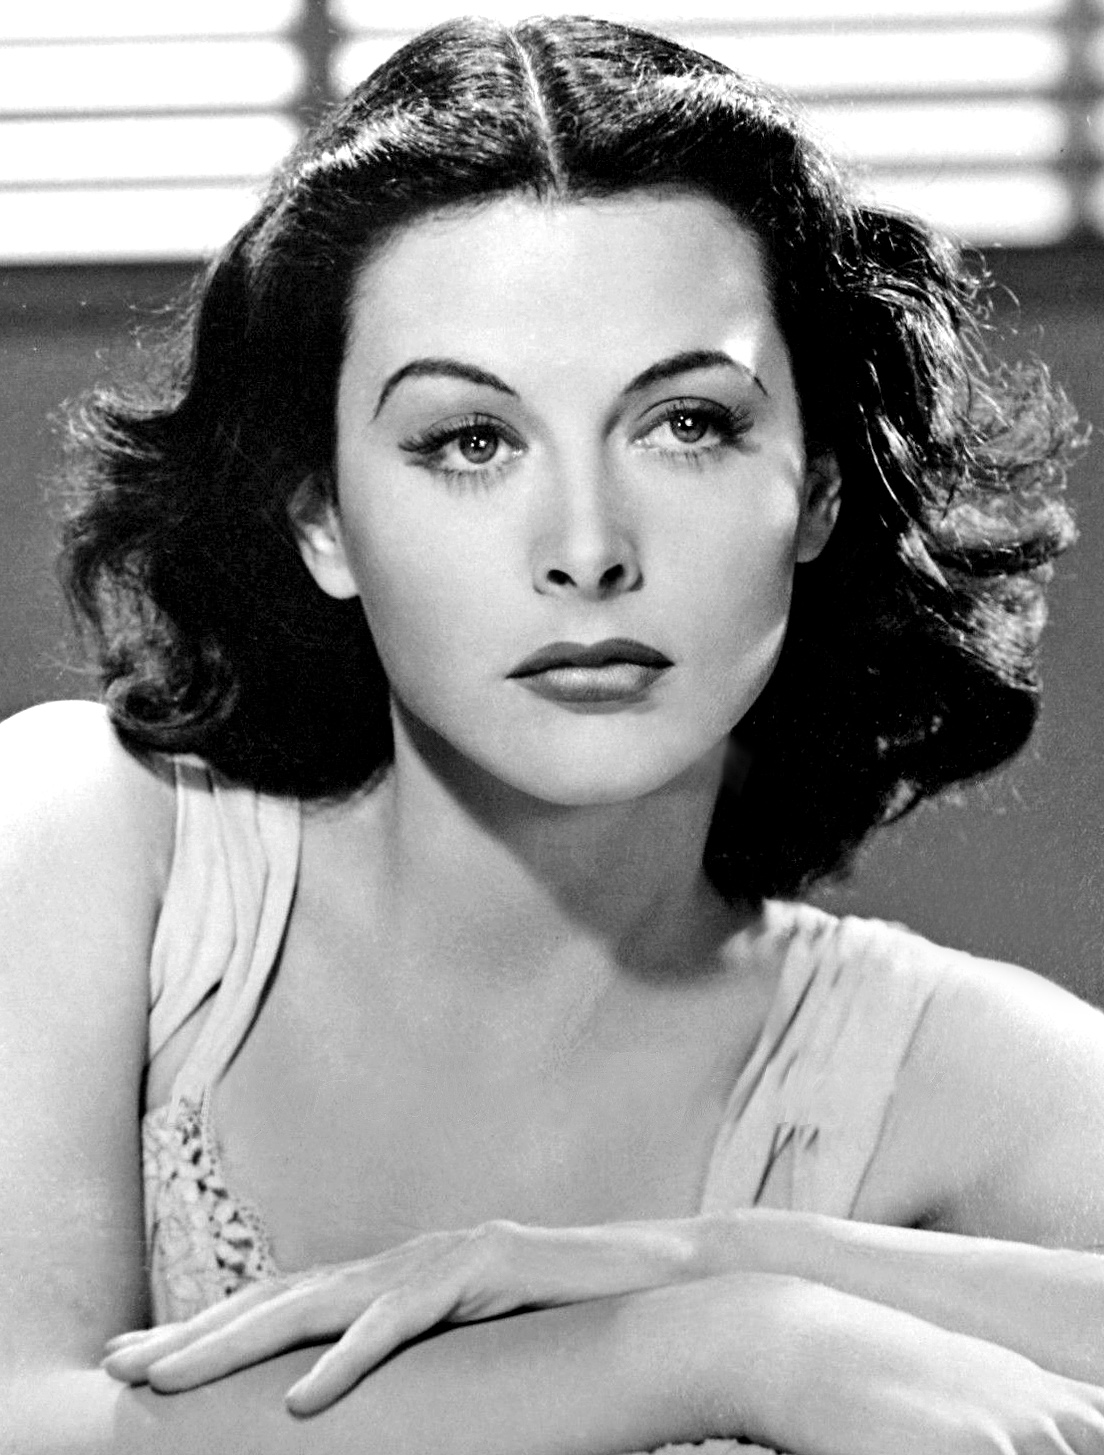 Photo of Hedy Lamarr in black and white